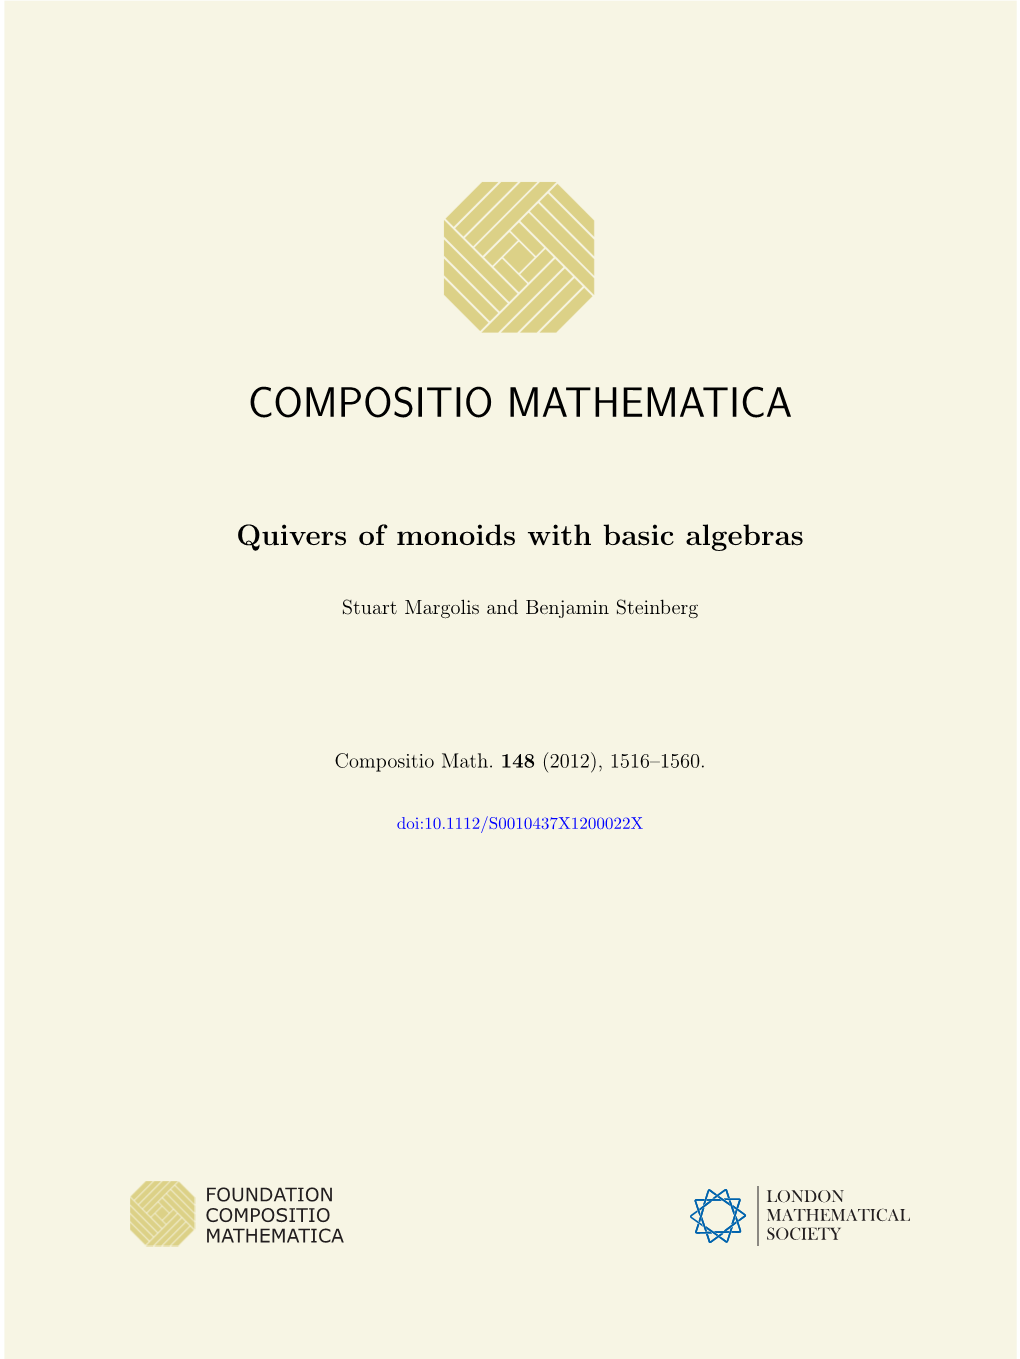 Quivers of Monoids with Basic Algebras